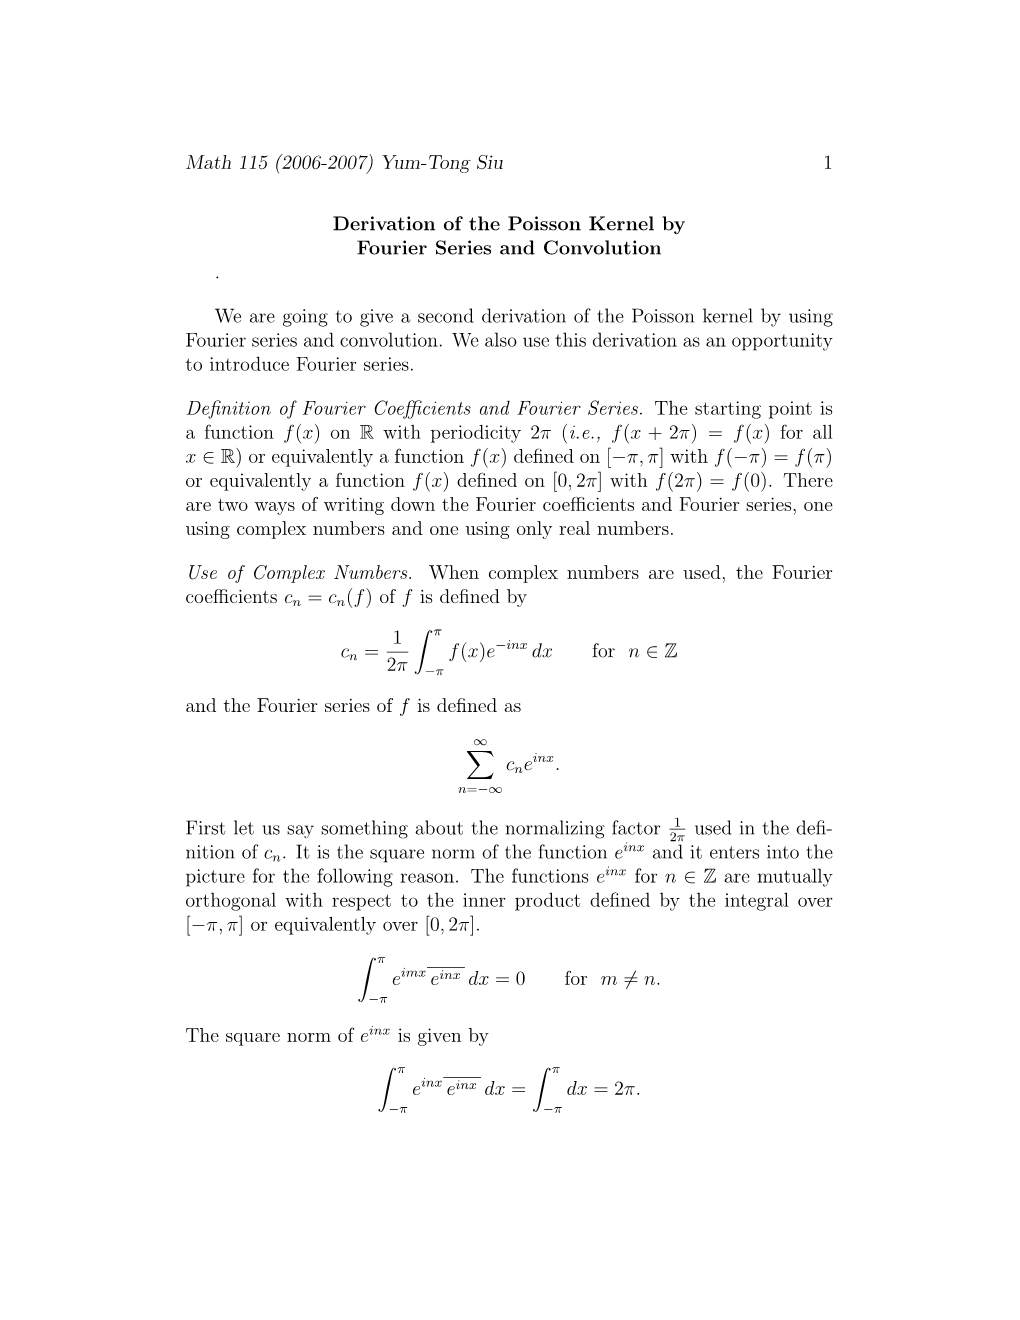 Derivation of the Poisson Kernel by Fourier Series and Convolution